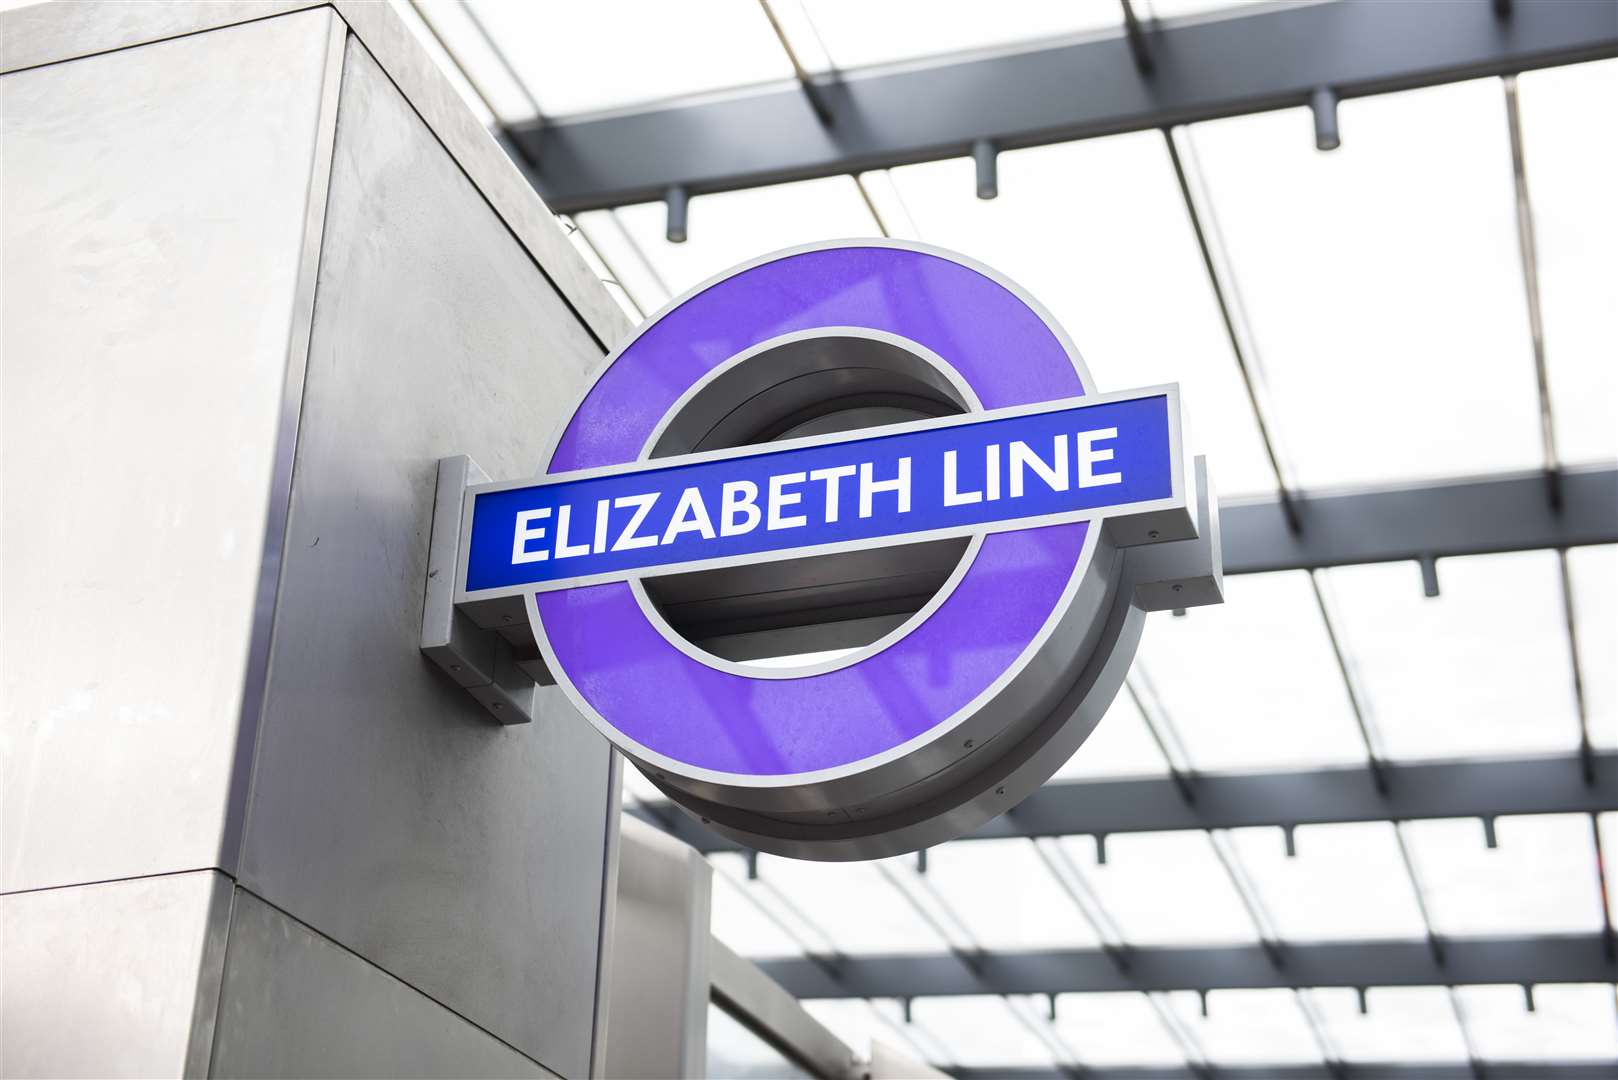 The cost of extending the Elizabeth Line could cost up to £3.2bn